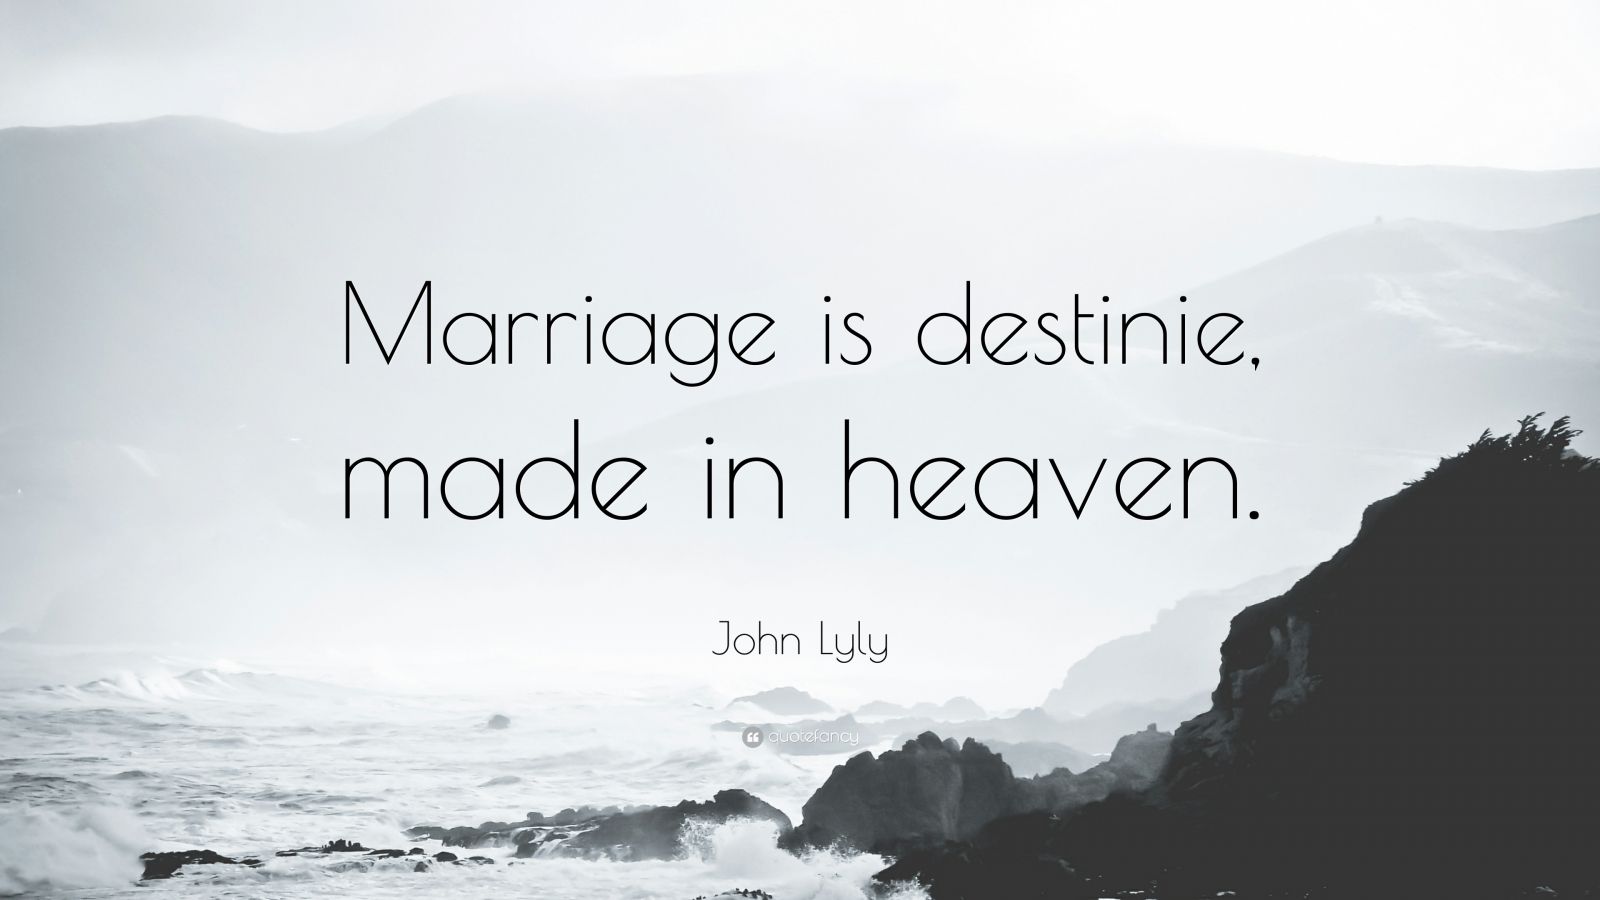 John Lyly Quote: “Marriage is destinie, made in heaven ...